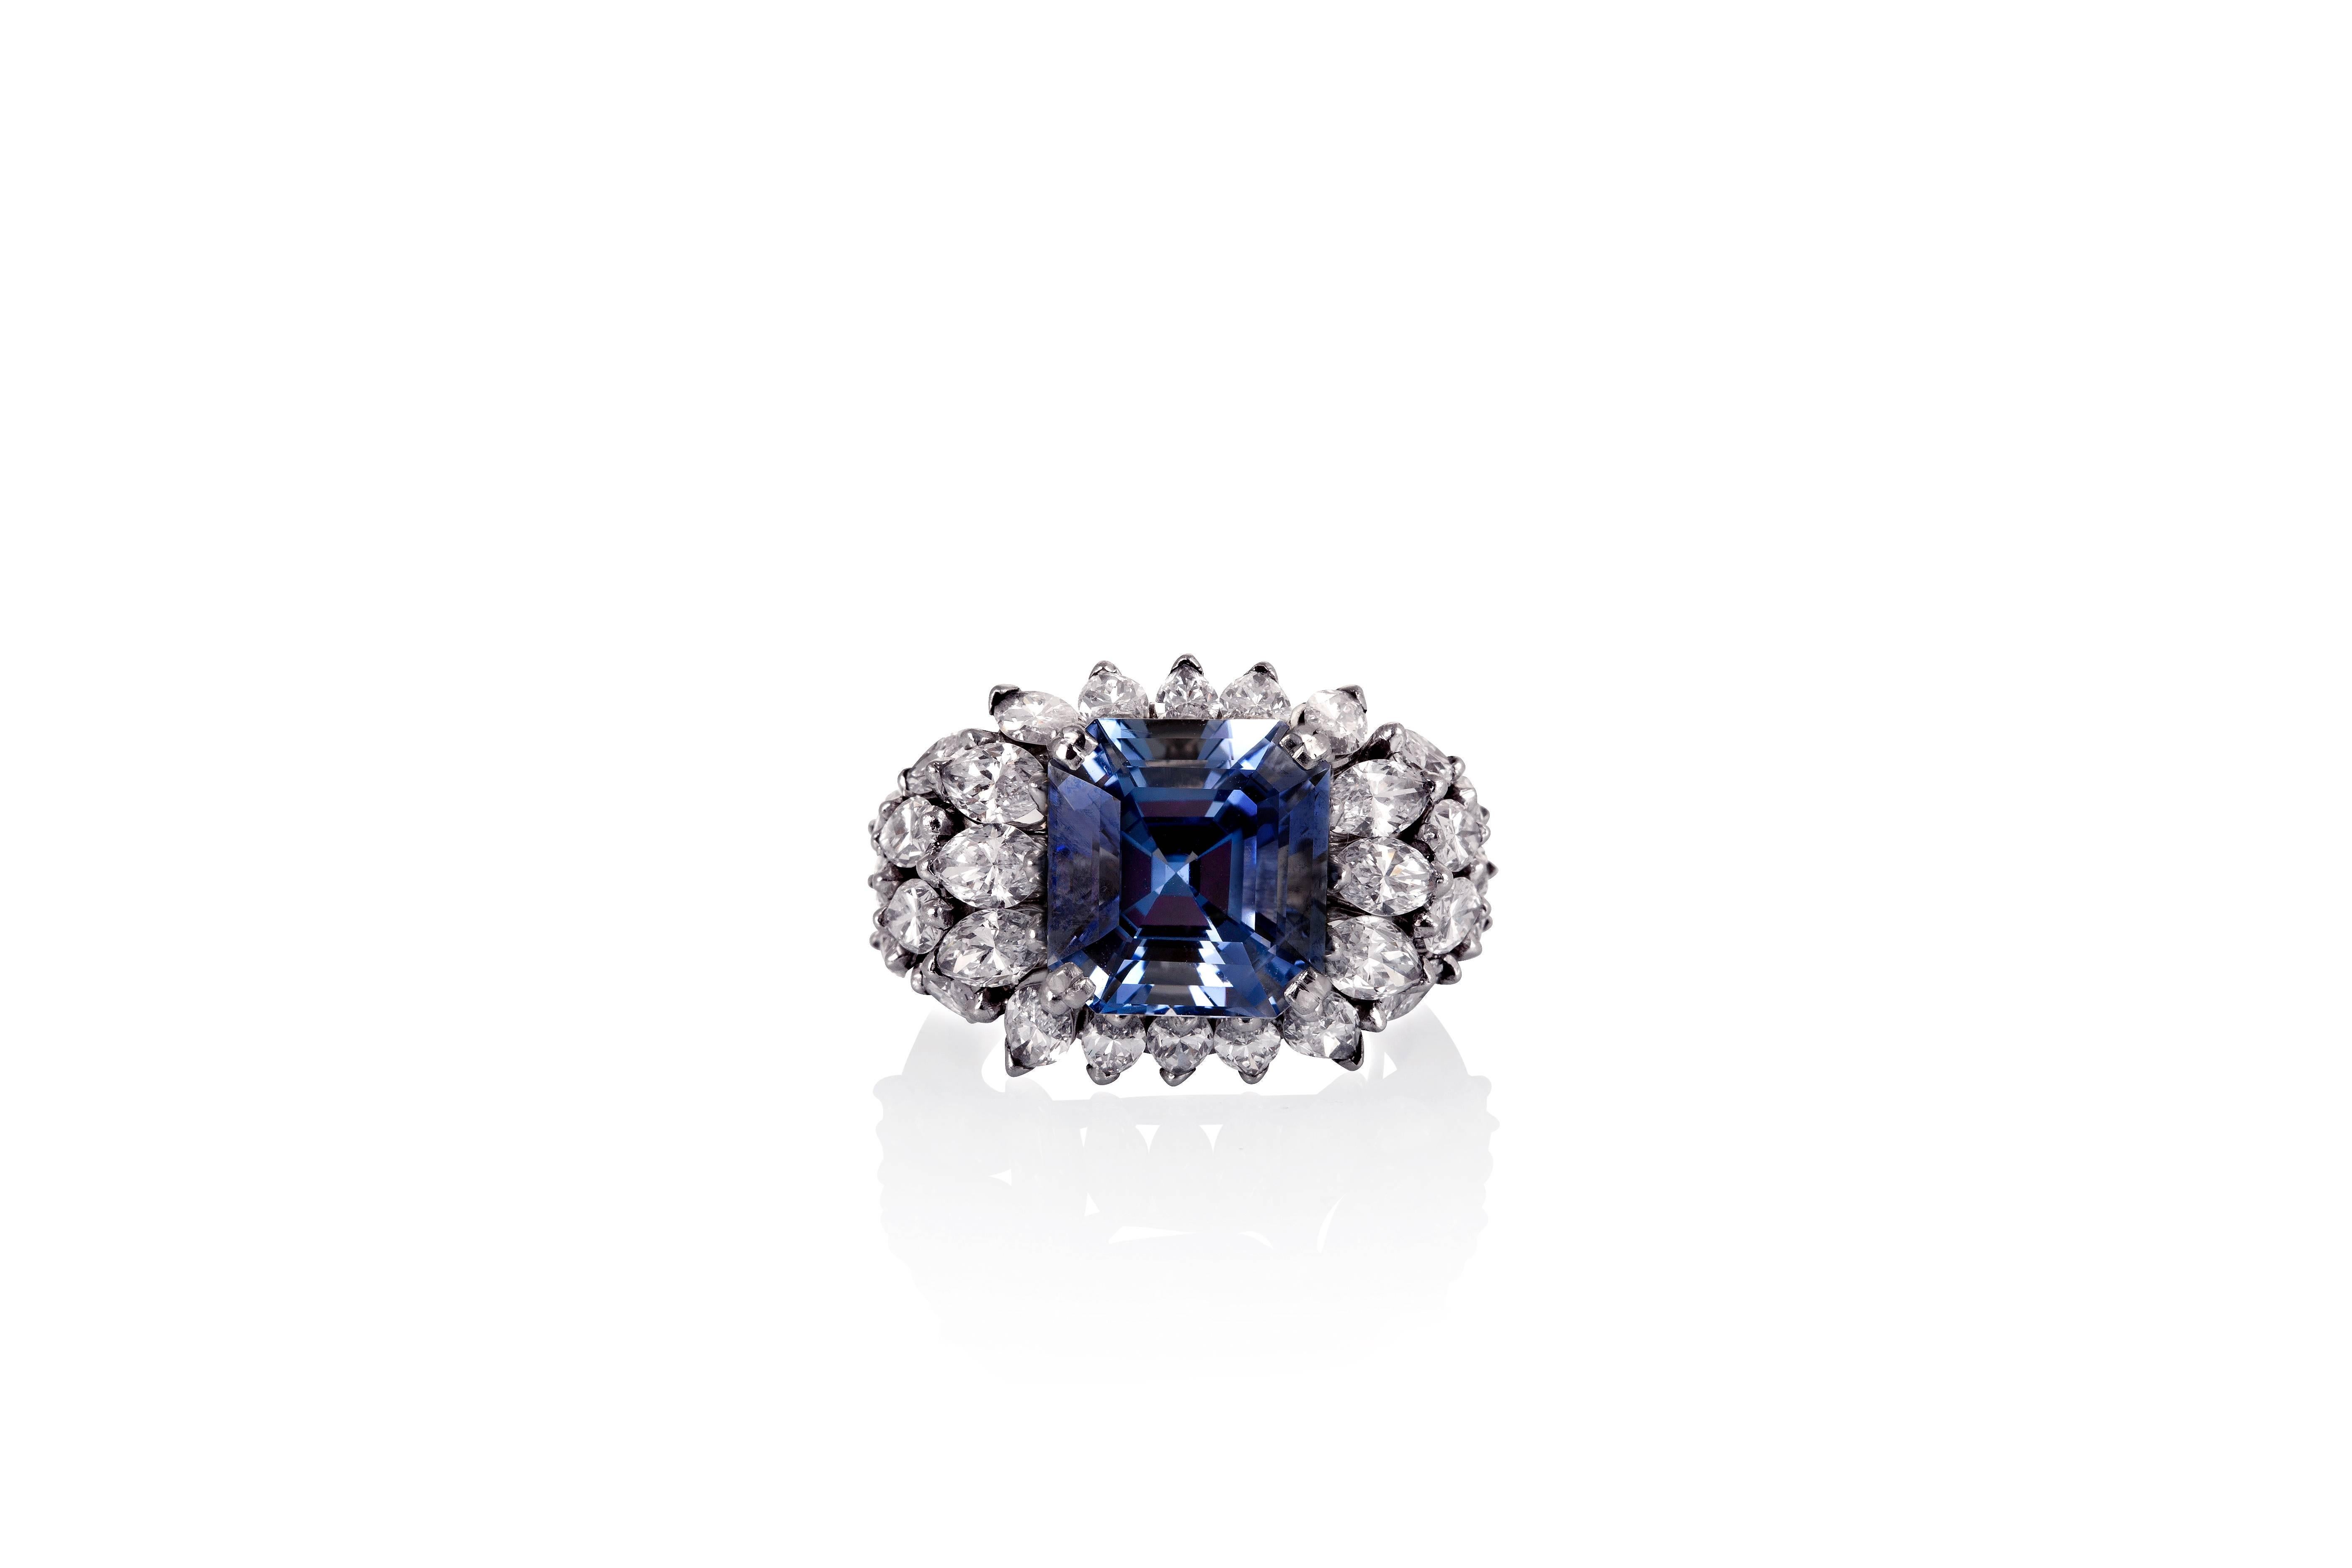 Centered on an emerald cut blue sapphire weighing 8.02 carats, this ring is enhanced by a cluster of 30 marquise diamonds weighing an estimated 4.1 carats, mounted in platinum.
Ring size: 6.5
